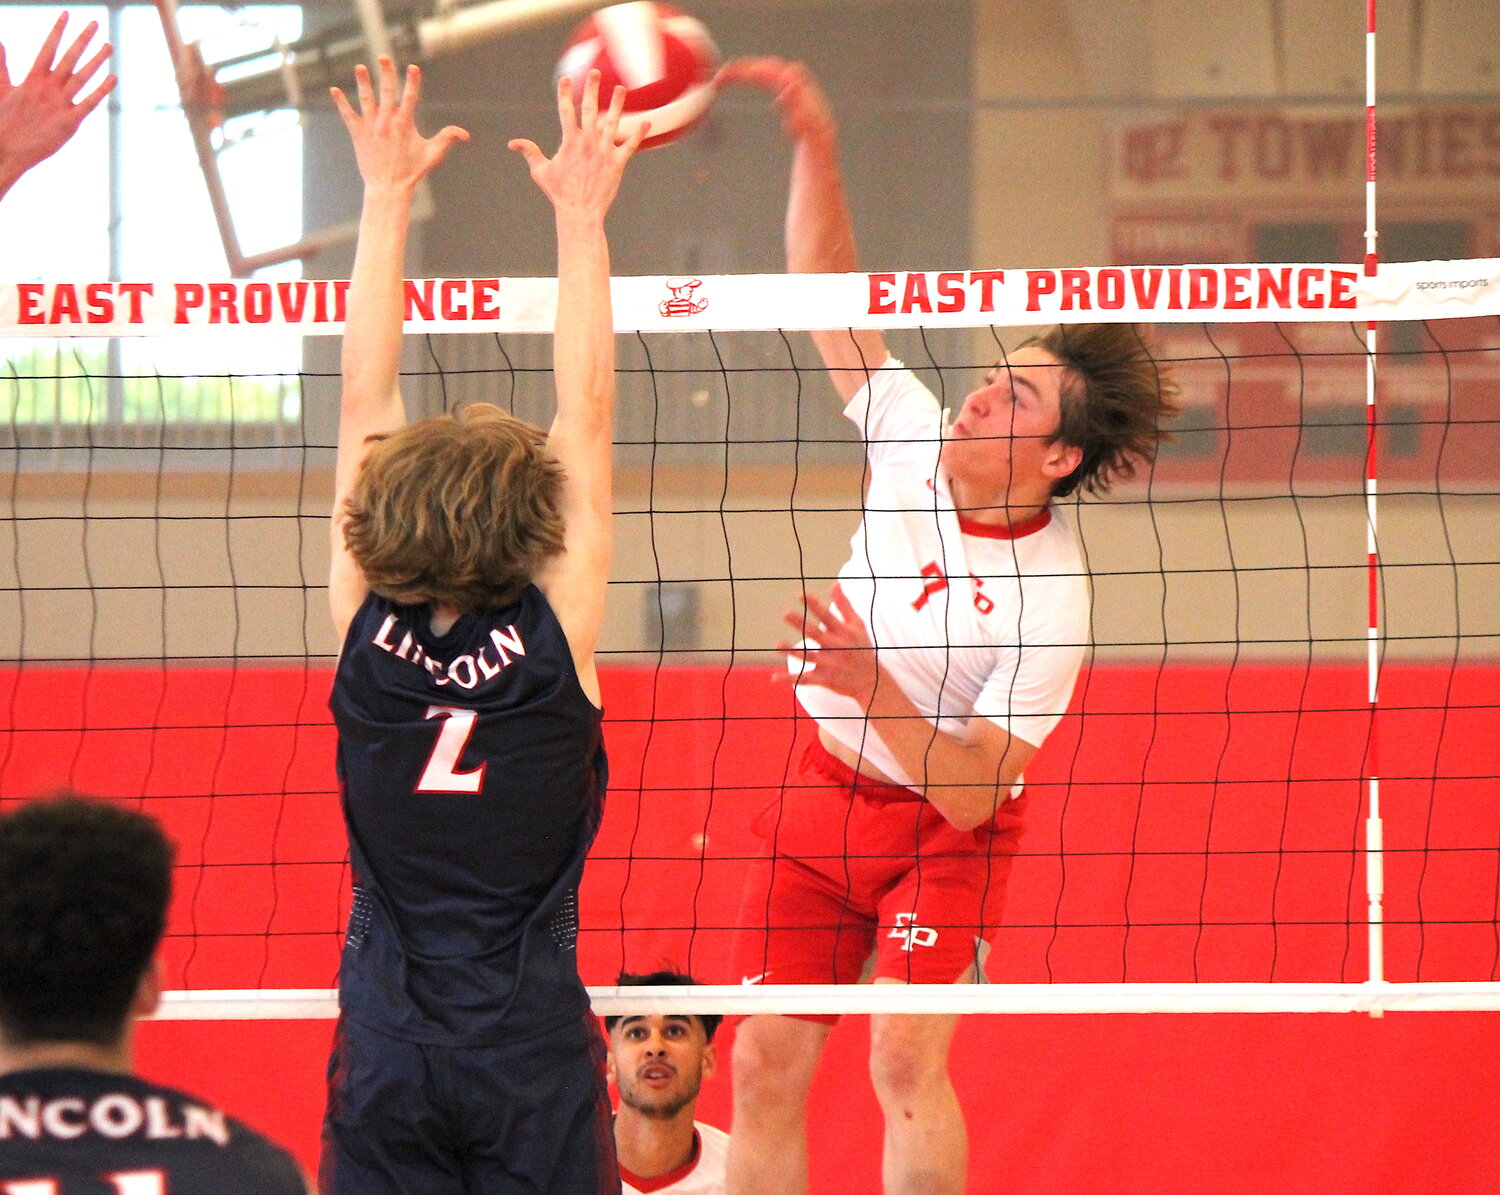 DJ Lepine led the Townies with 15 kills in their loss to the Lions.